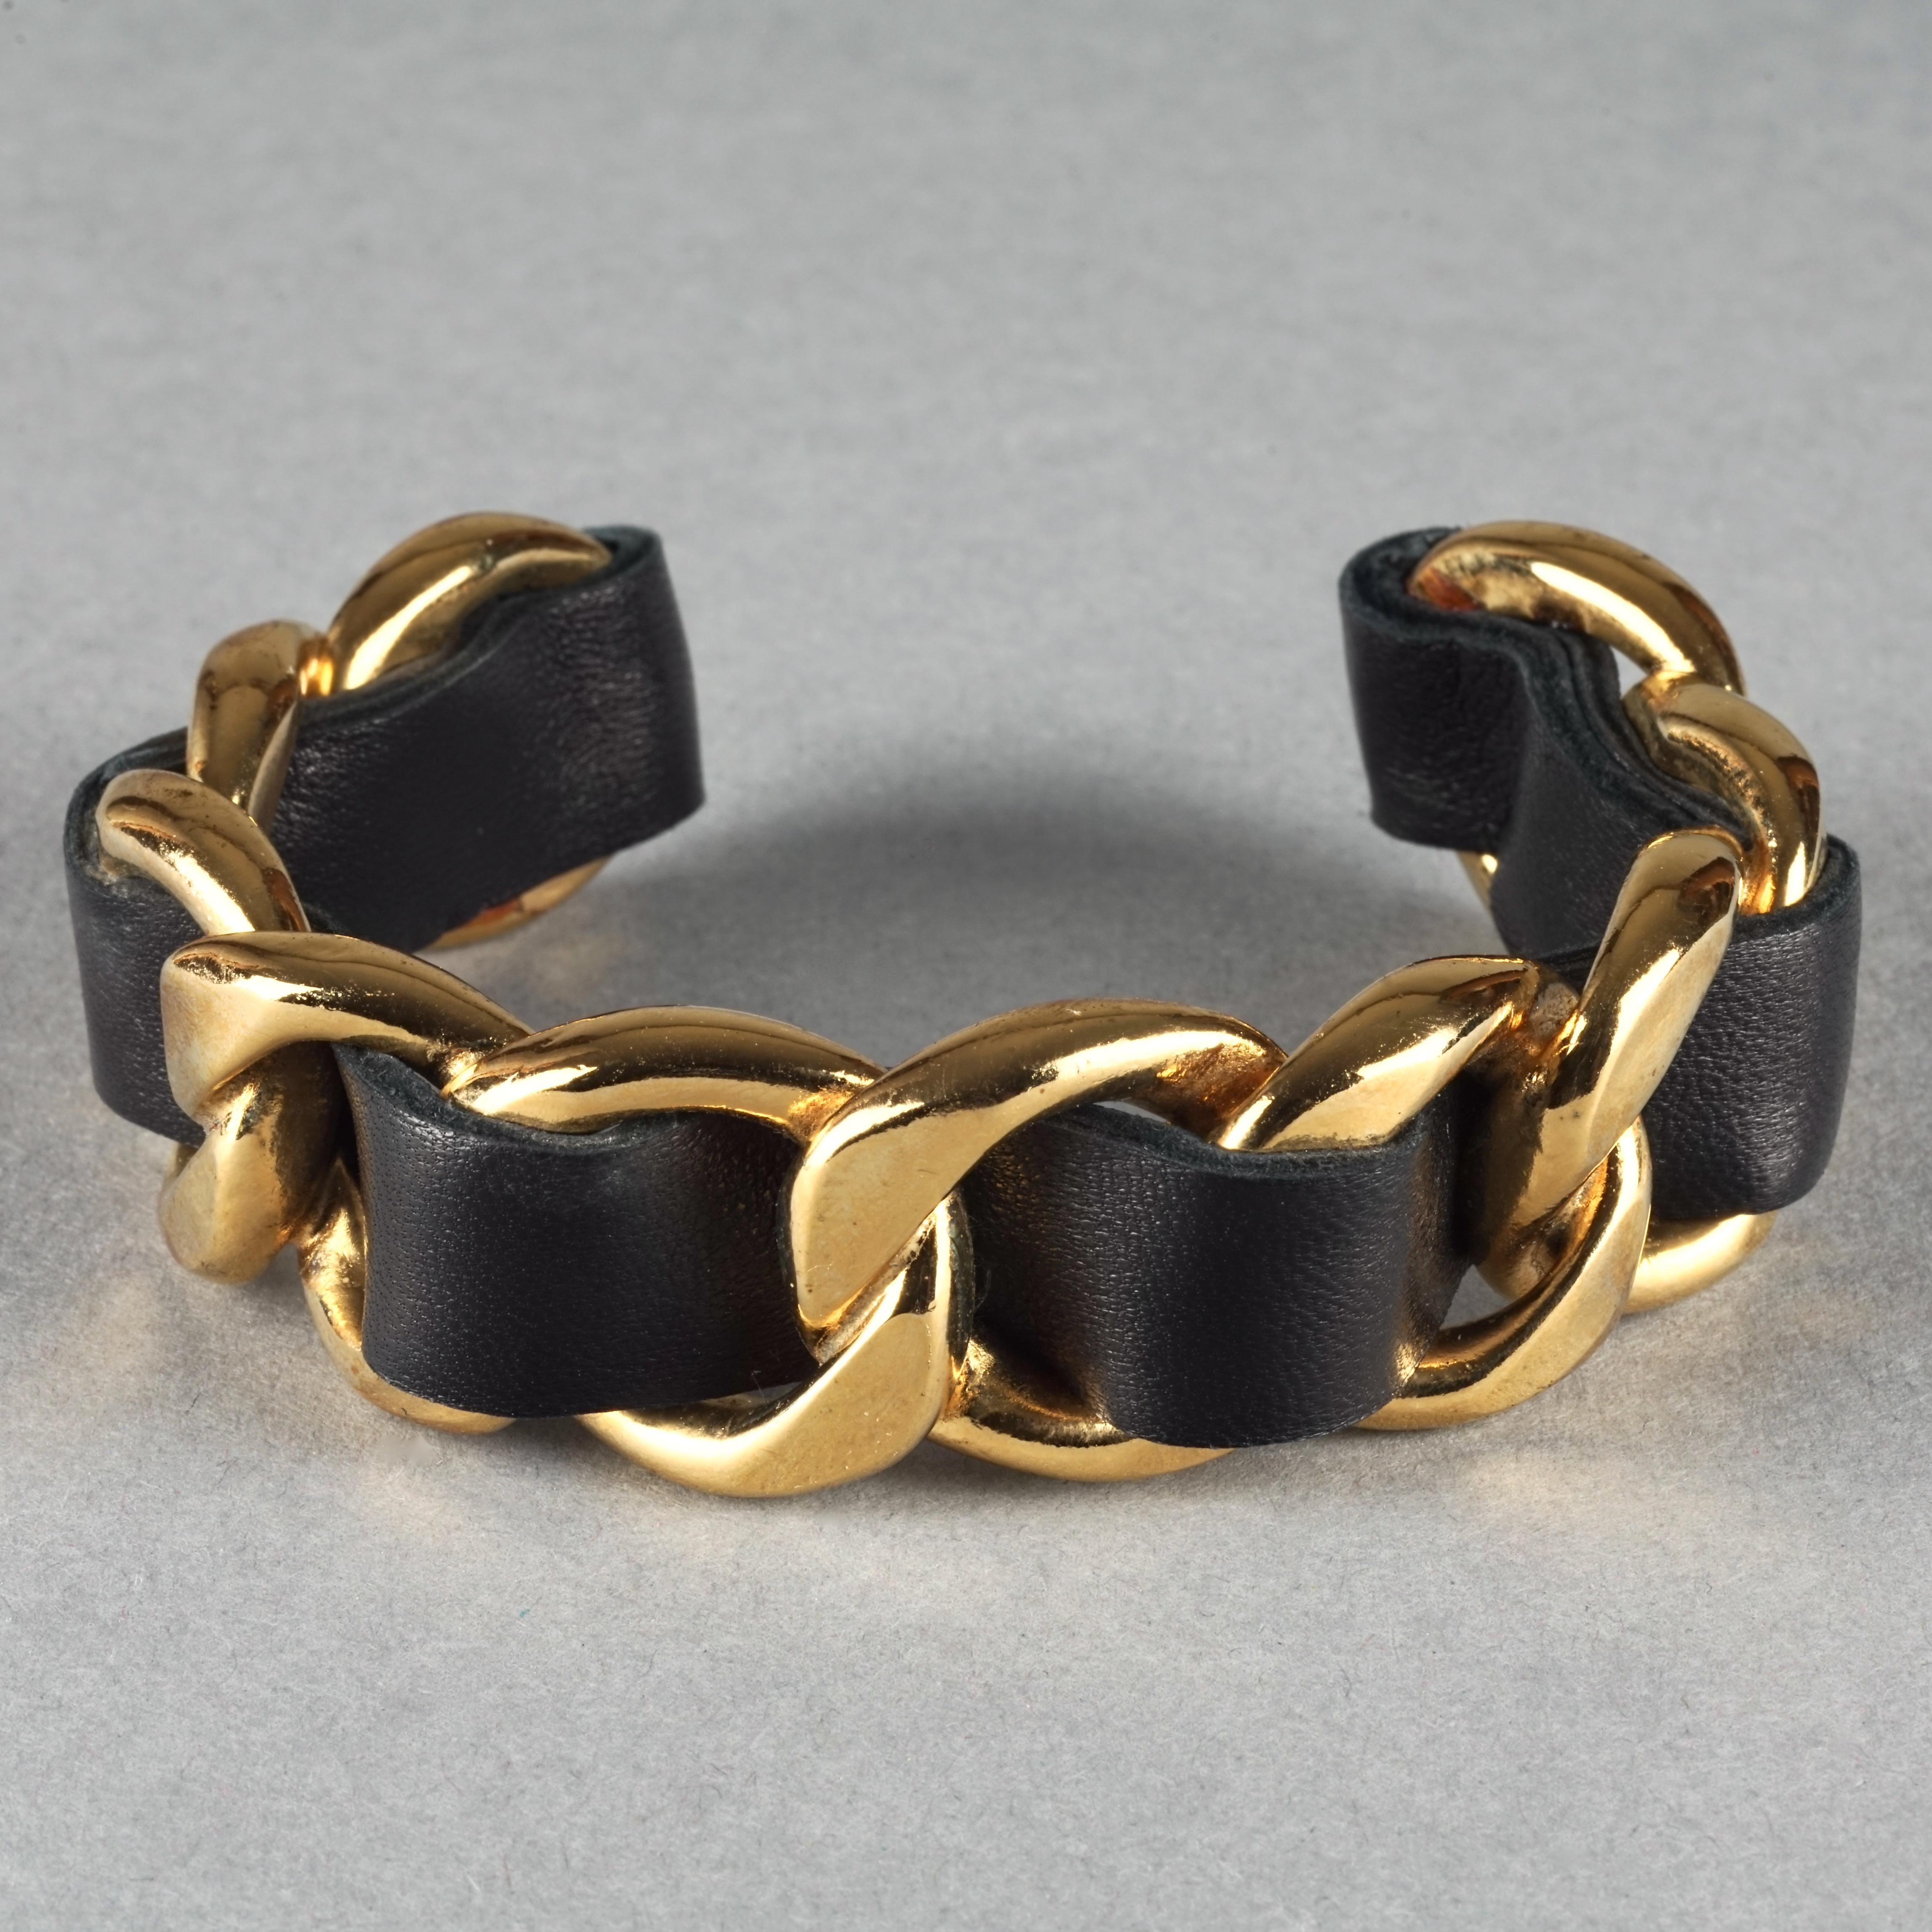 Women's Vintage CHANEL Classic Gold Chain and Leather Cuff Bracelet